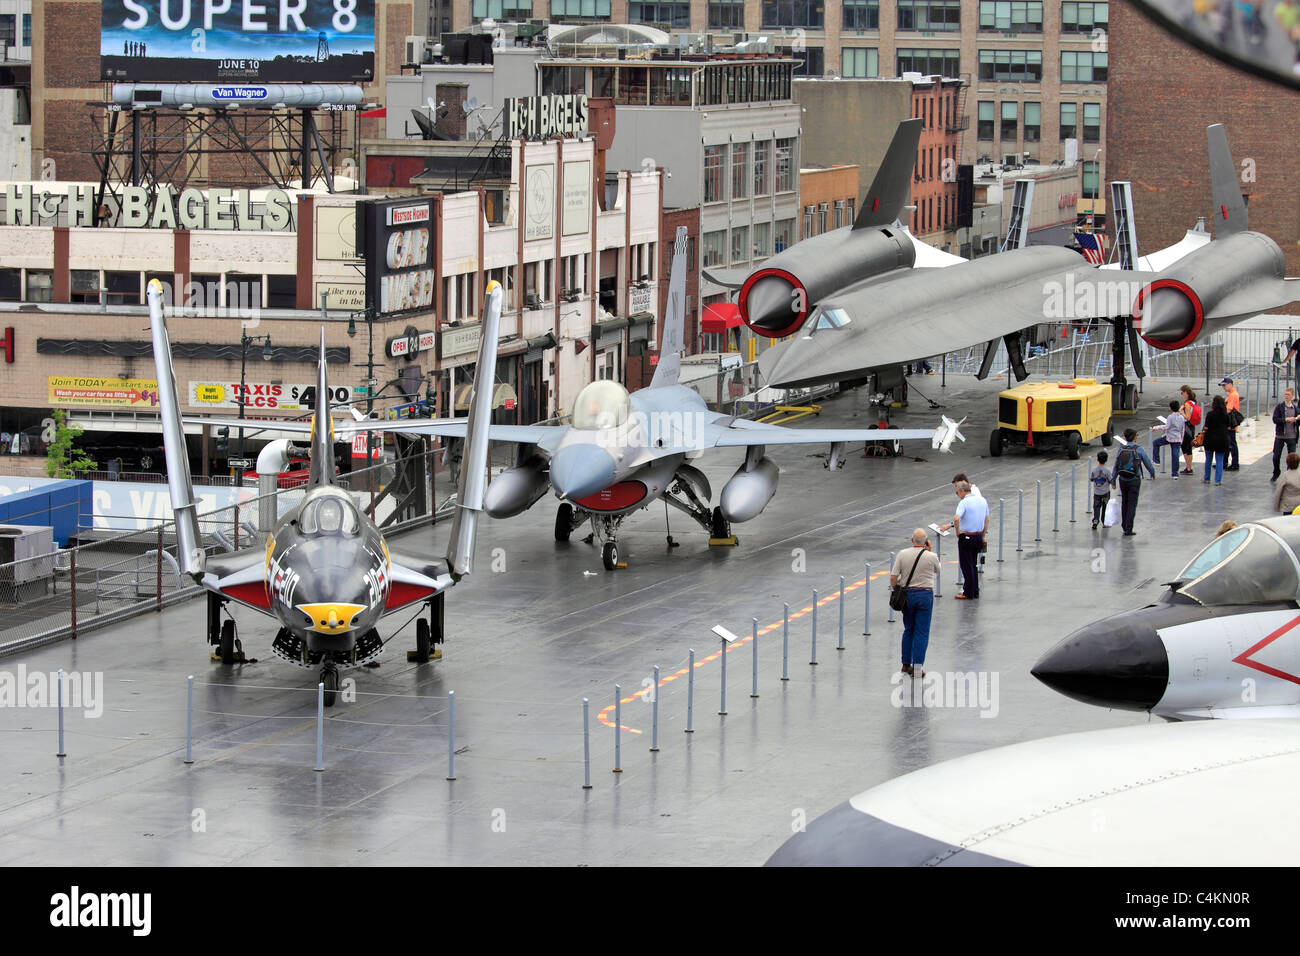 Aircraft on display on the flight deck of the USS Intrepid Aircraft Carrier museum Pier 86 Hudson River Manhattan New York City Stock Photo